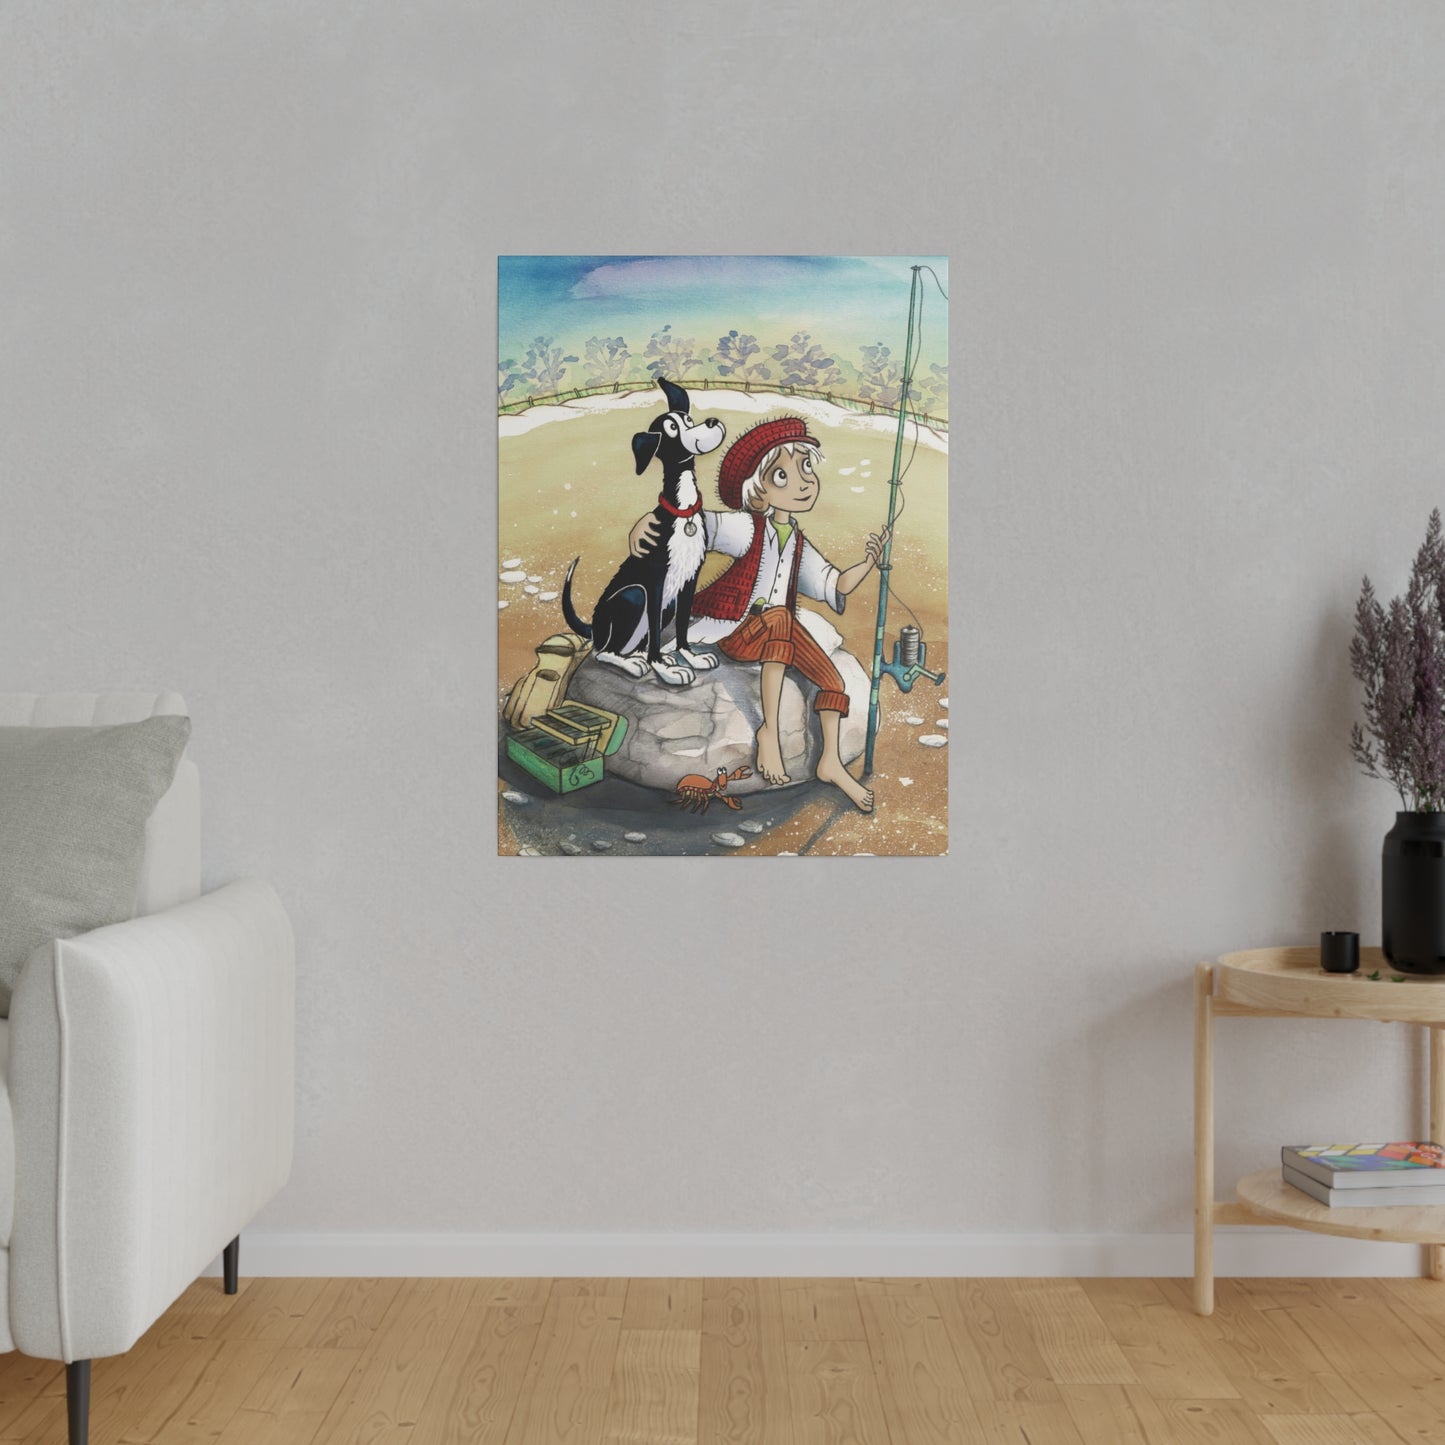 A 24" x 32" 'Dogs Pure Love Fishing' canvas hangs on a mauve colored living room wall.